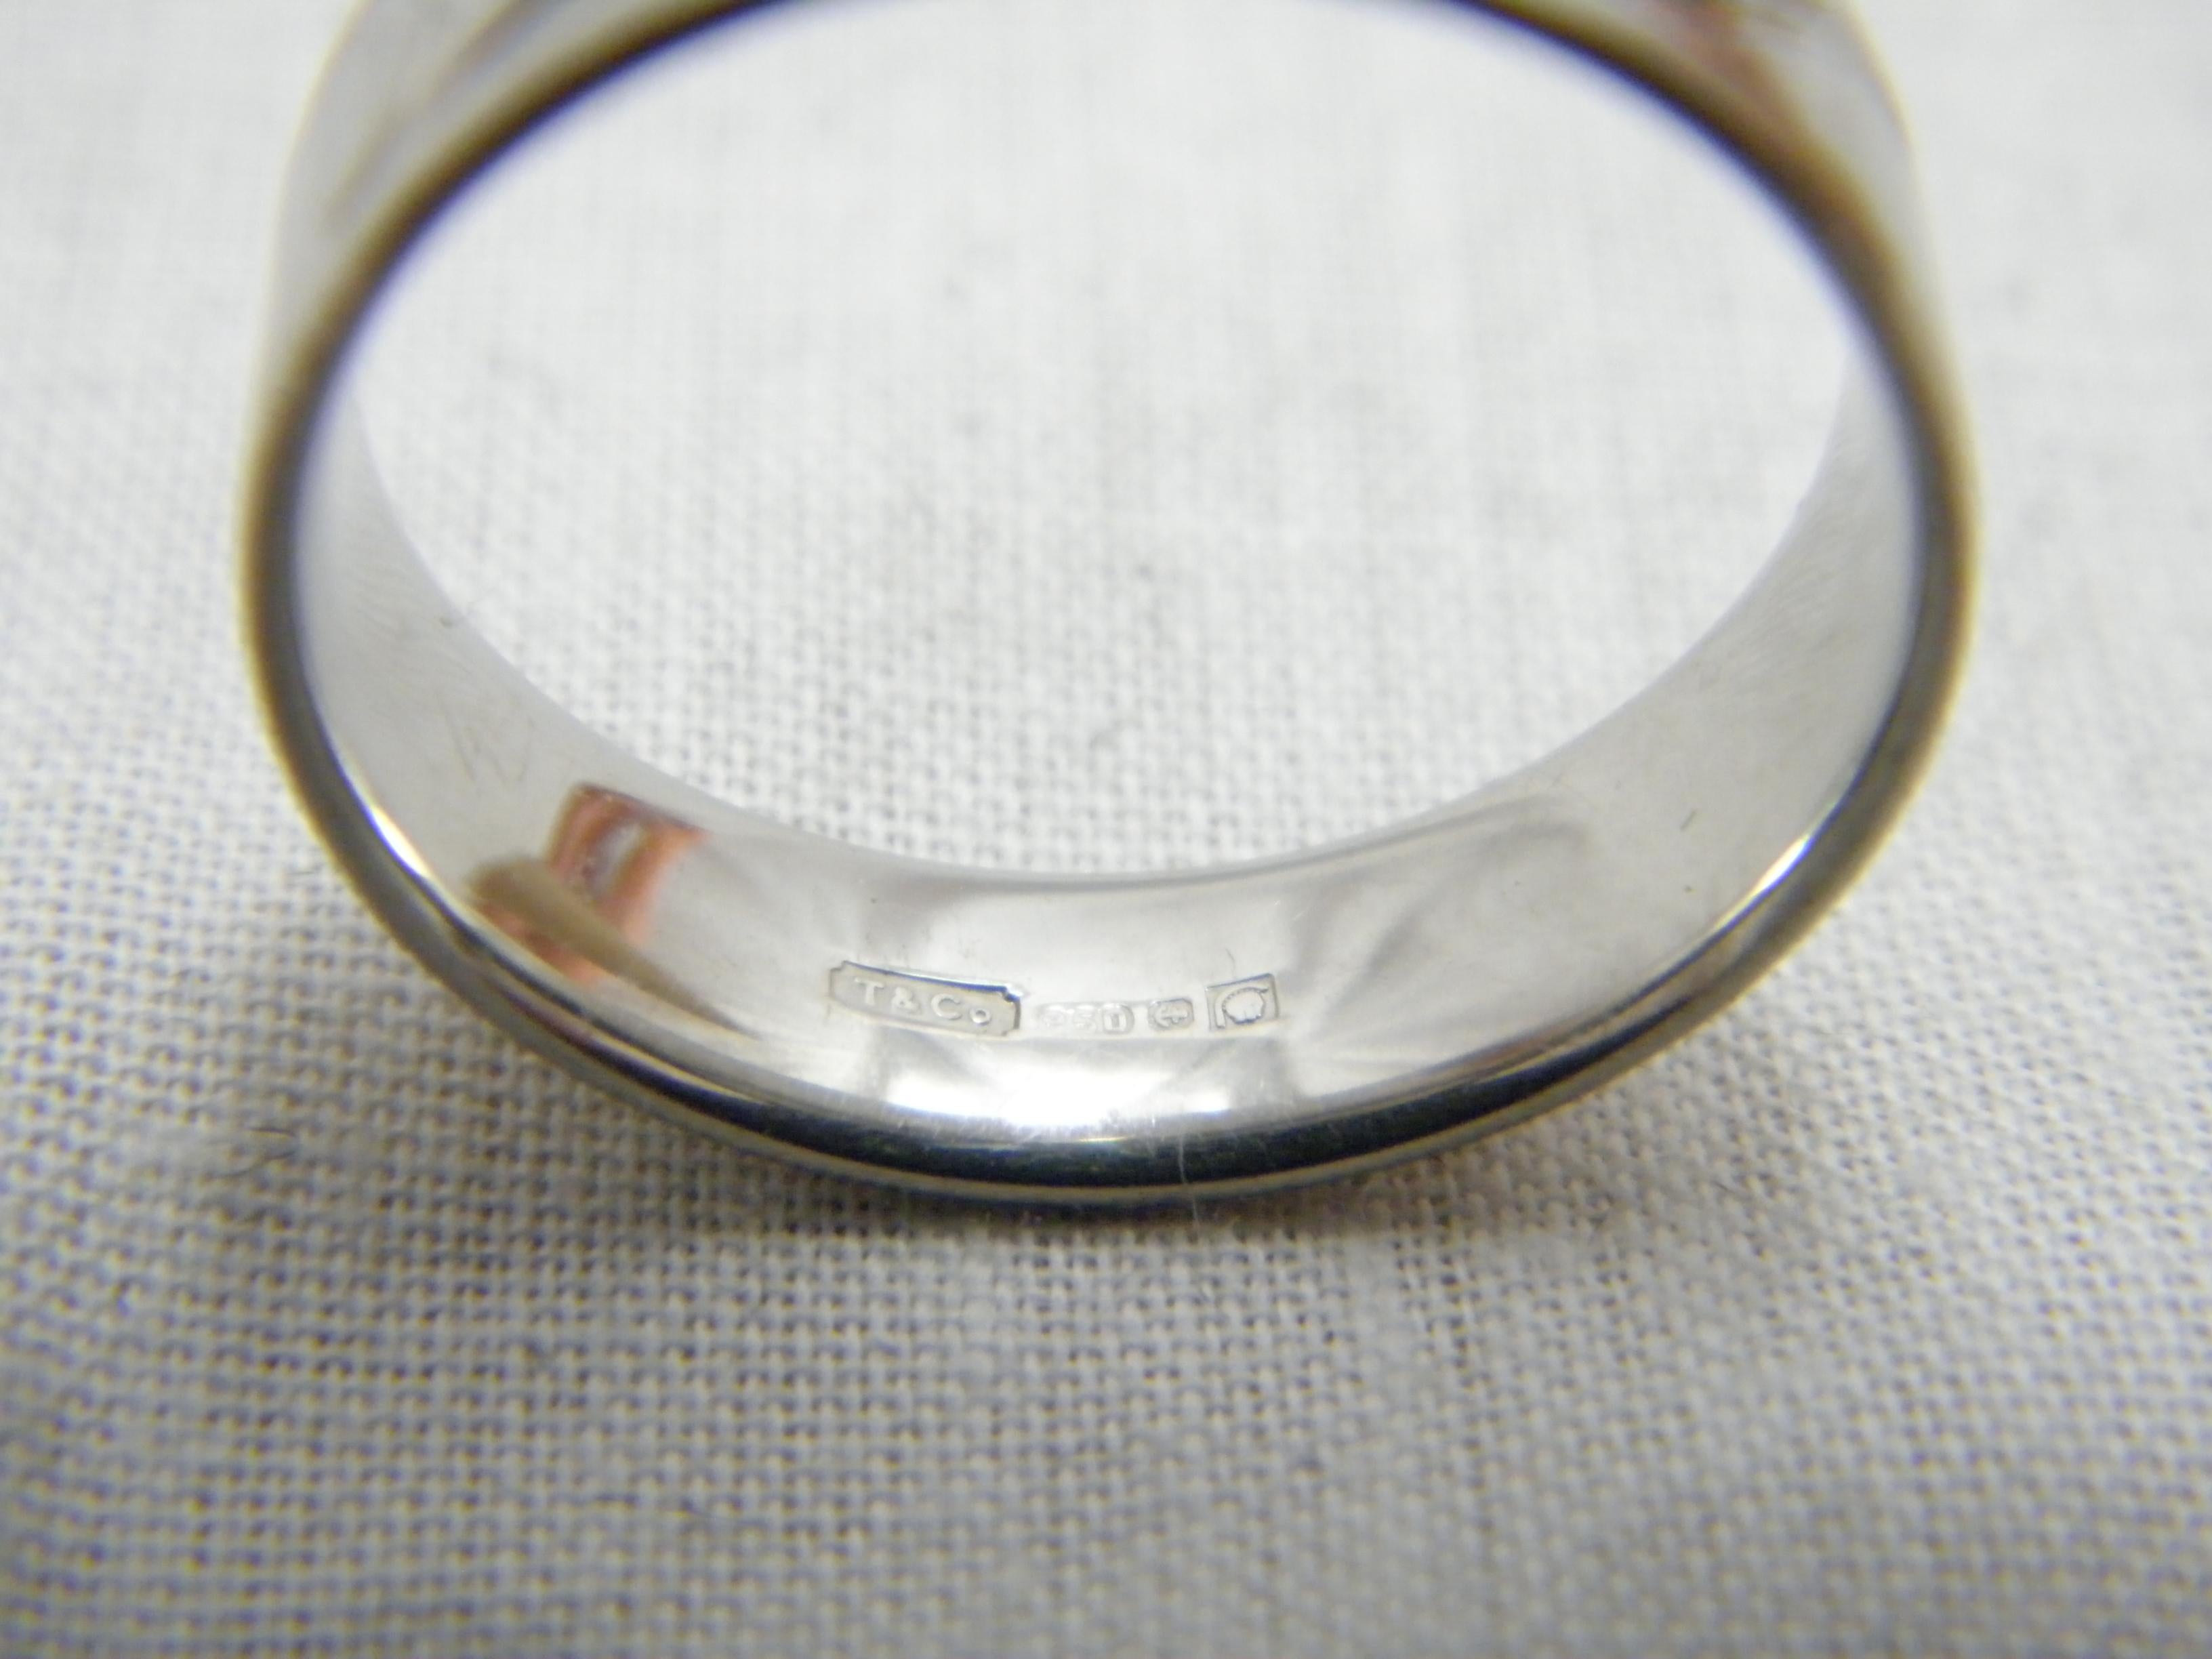 Vintage Tiffany Palladium 6.2mm Wave Ring Size Q1/2 8.5 950 Purity Band T&Co For Sale 3